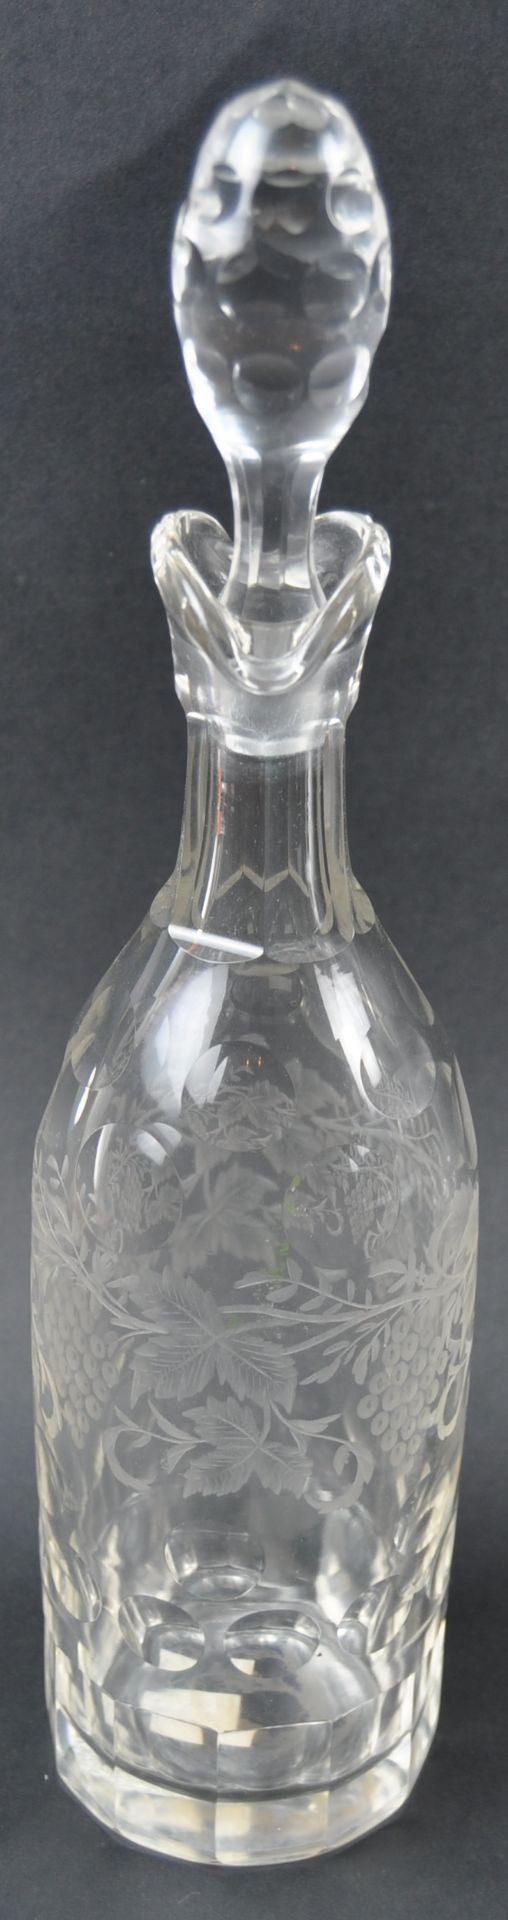 19TH CENTURY ETCHED GLASS DRINKS DECANTERS & GLASSES - Image 5 of 5